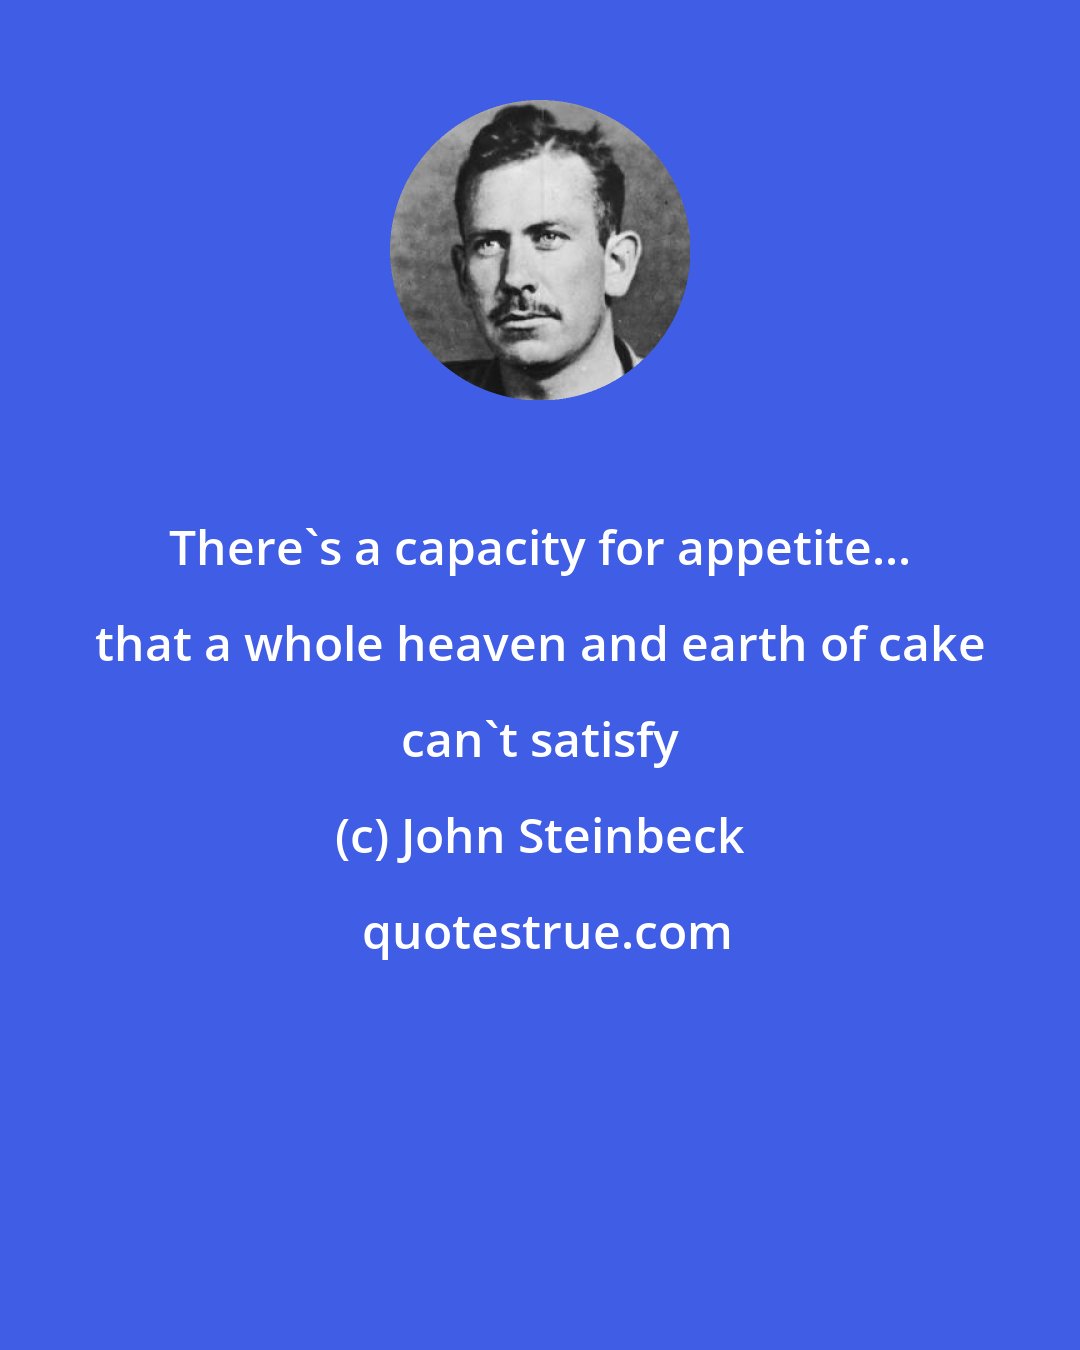 John Steinbeck: There's a capacity for appetite... that a whole heaven and earth of cake can't satisfy